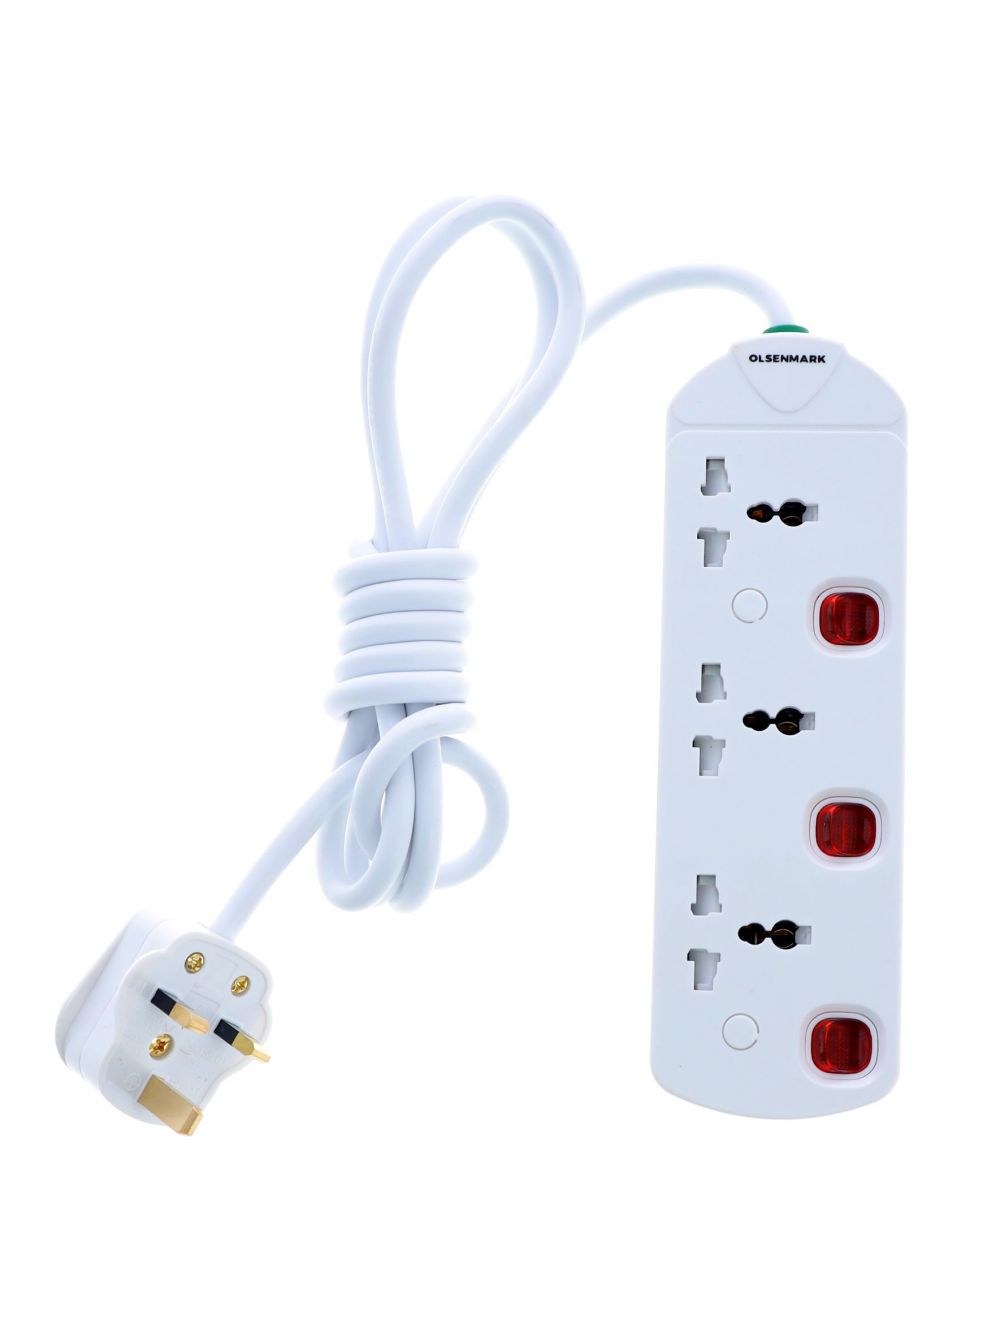 Olsenmark 3-Way Extension Socket 13A - Extension Lead Strip with Led Indicators